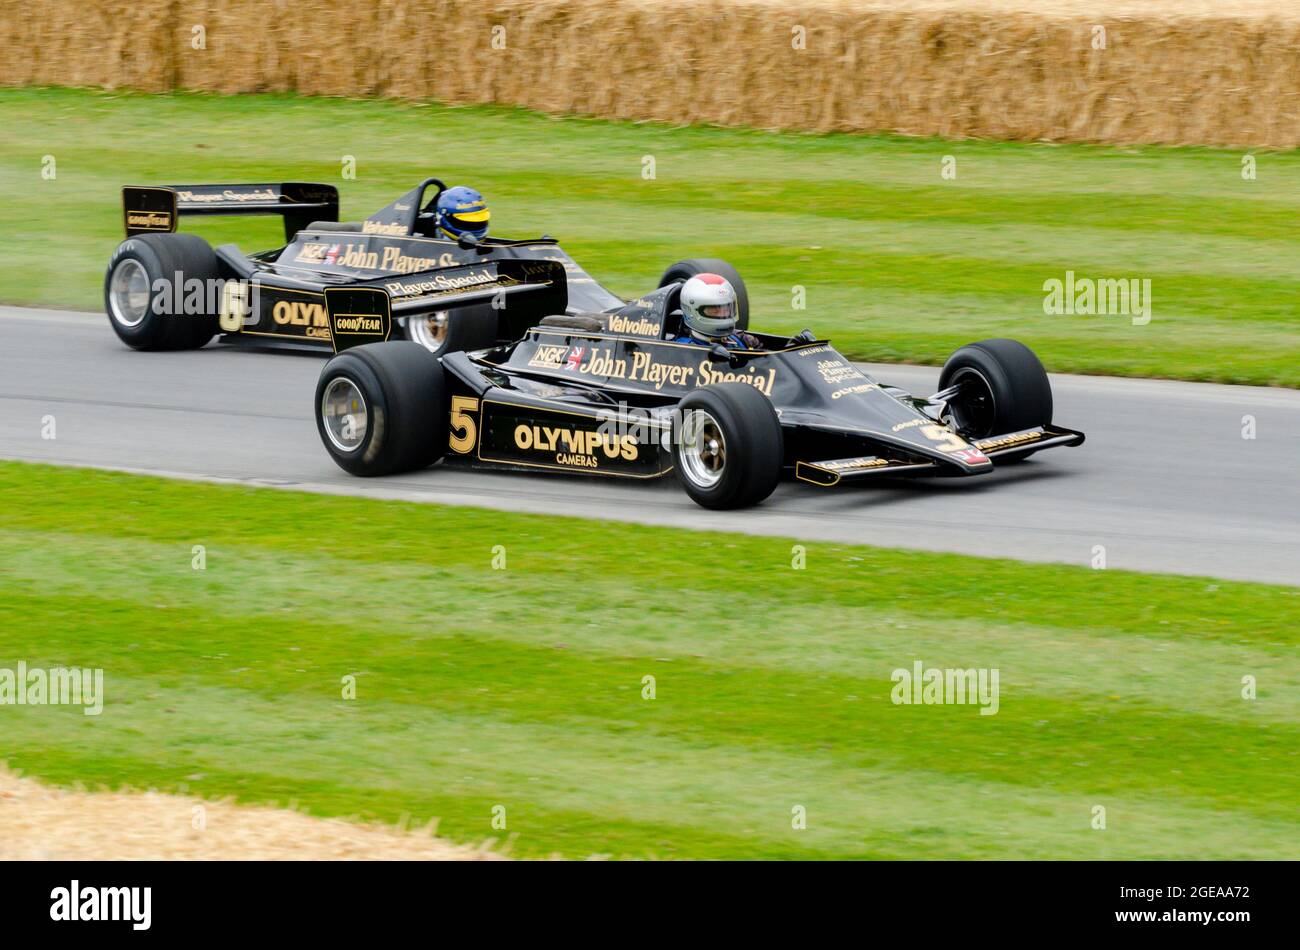 Classic Lotus 79 historic Grand Prix cars formerly of Mario Andretti and Ronnie Peterson at the Goodwood Festival of Speed motor racing event 2014 Stock Photo